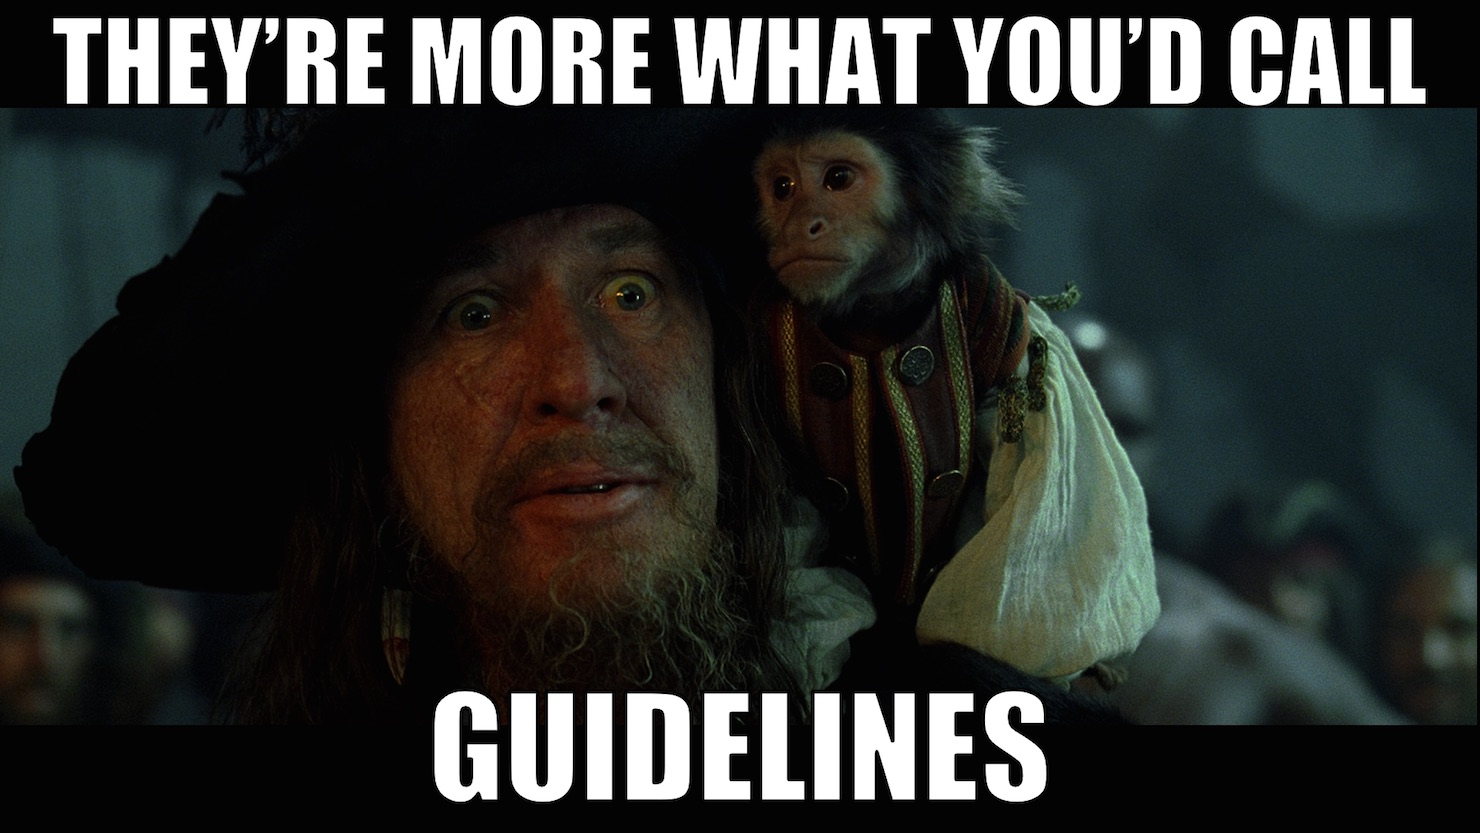 More like guidelines